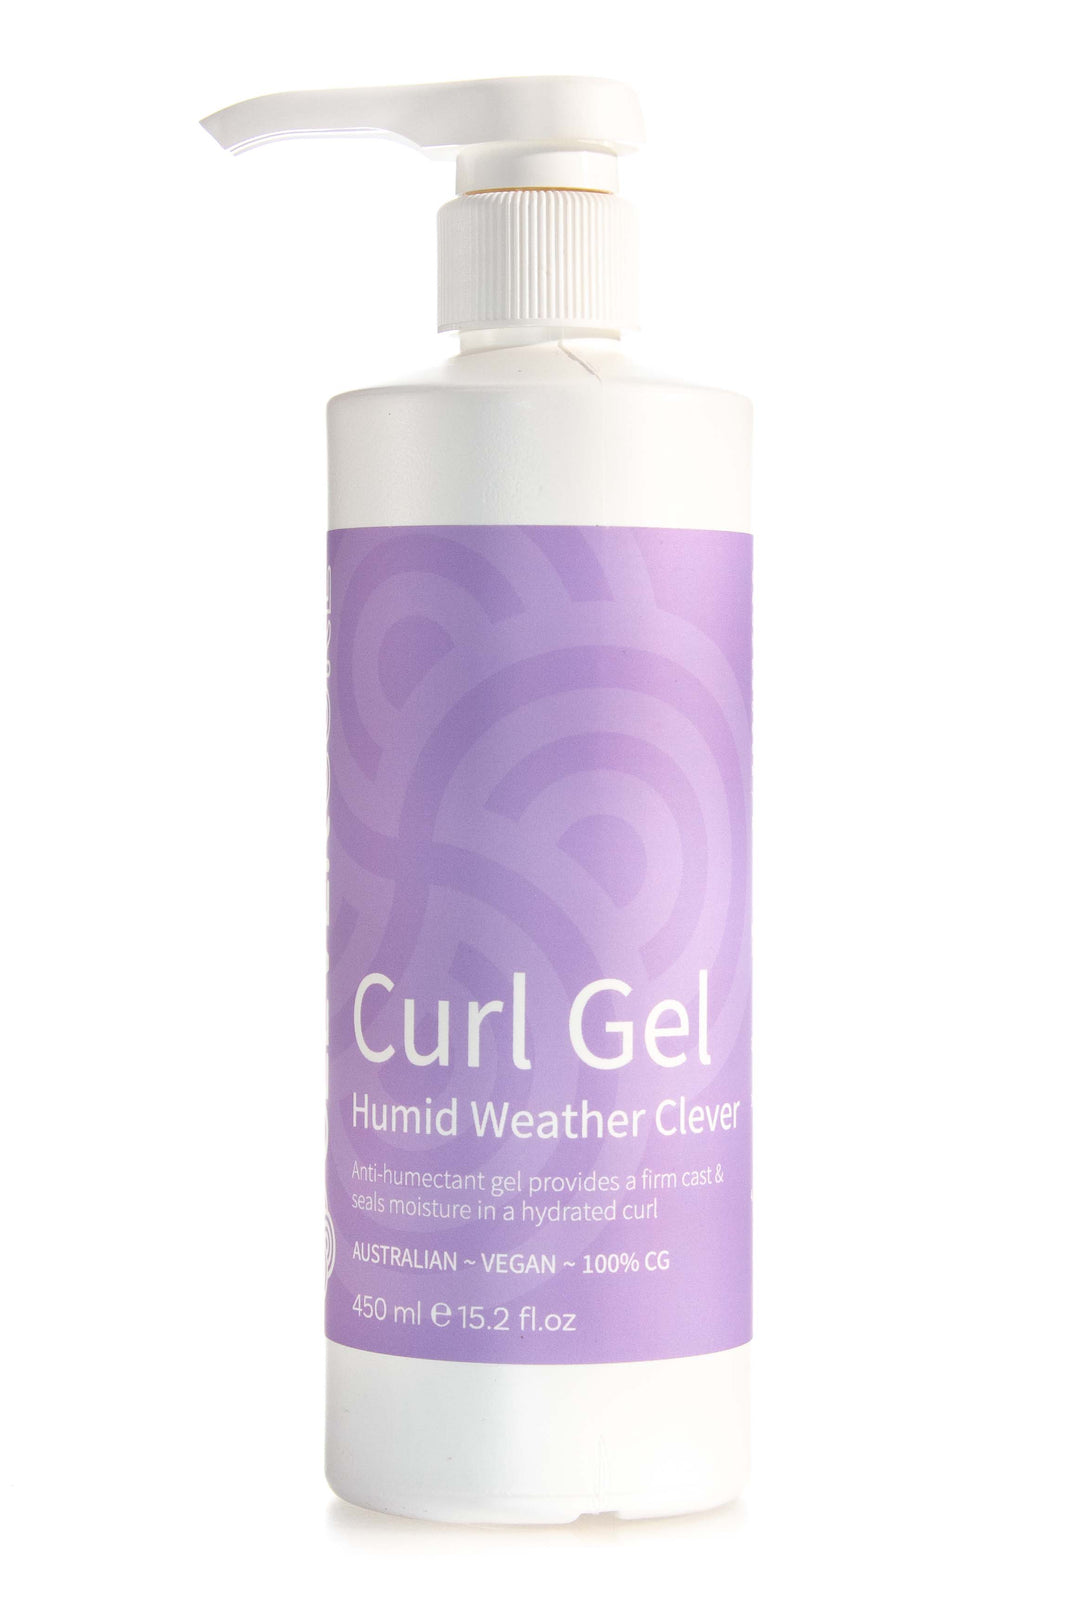 Product Image: Clever Curl Gel Humid Weather - 450ml